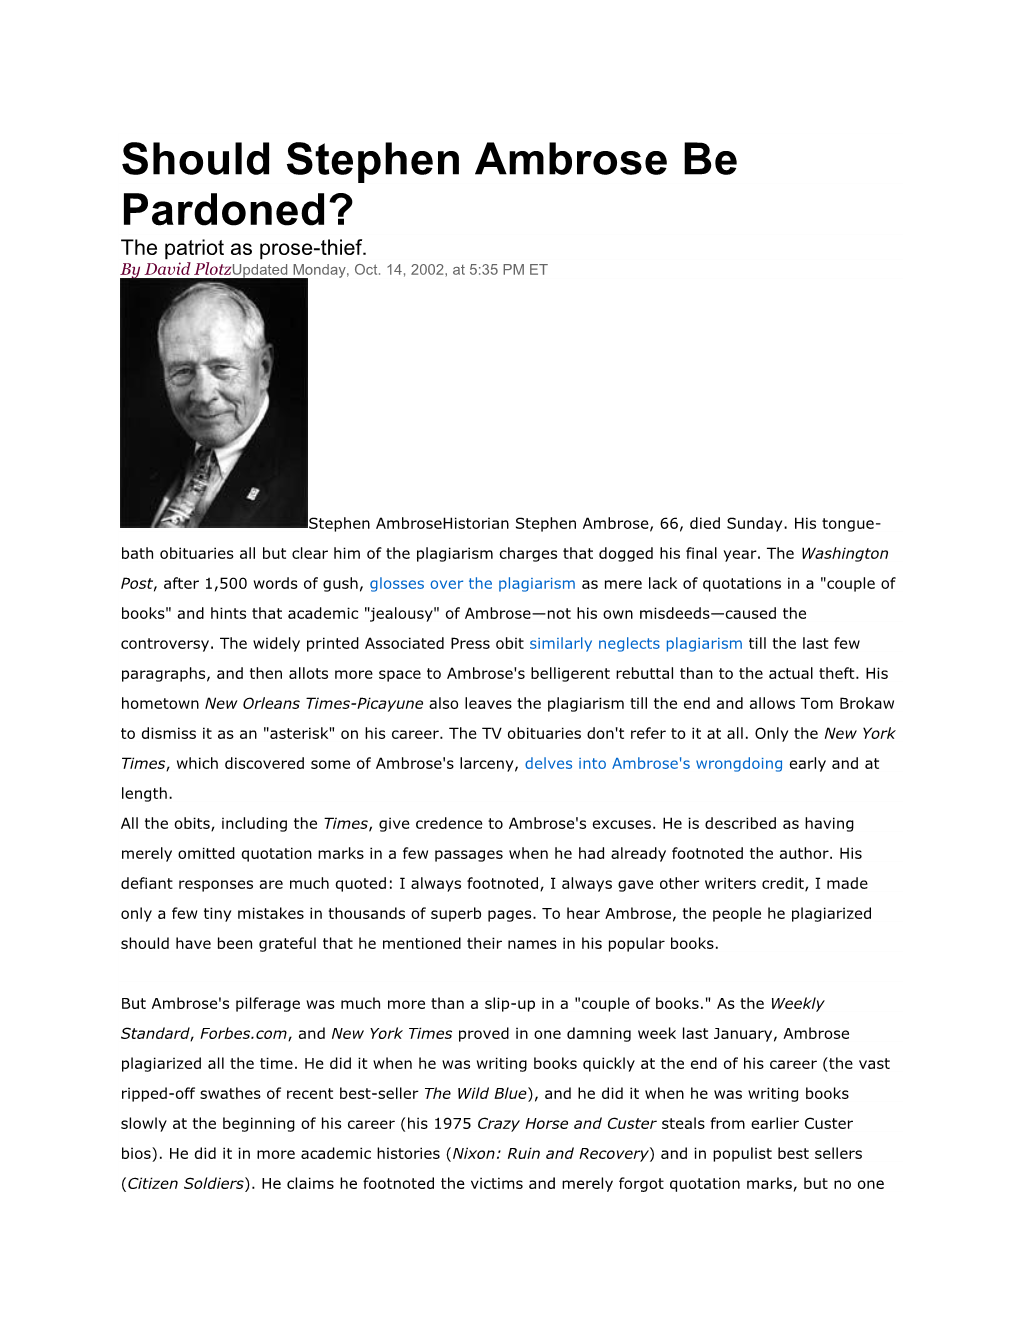 Should Stephen Ambrose Be Pardoned? the Patriot As Prose-Thief